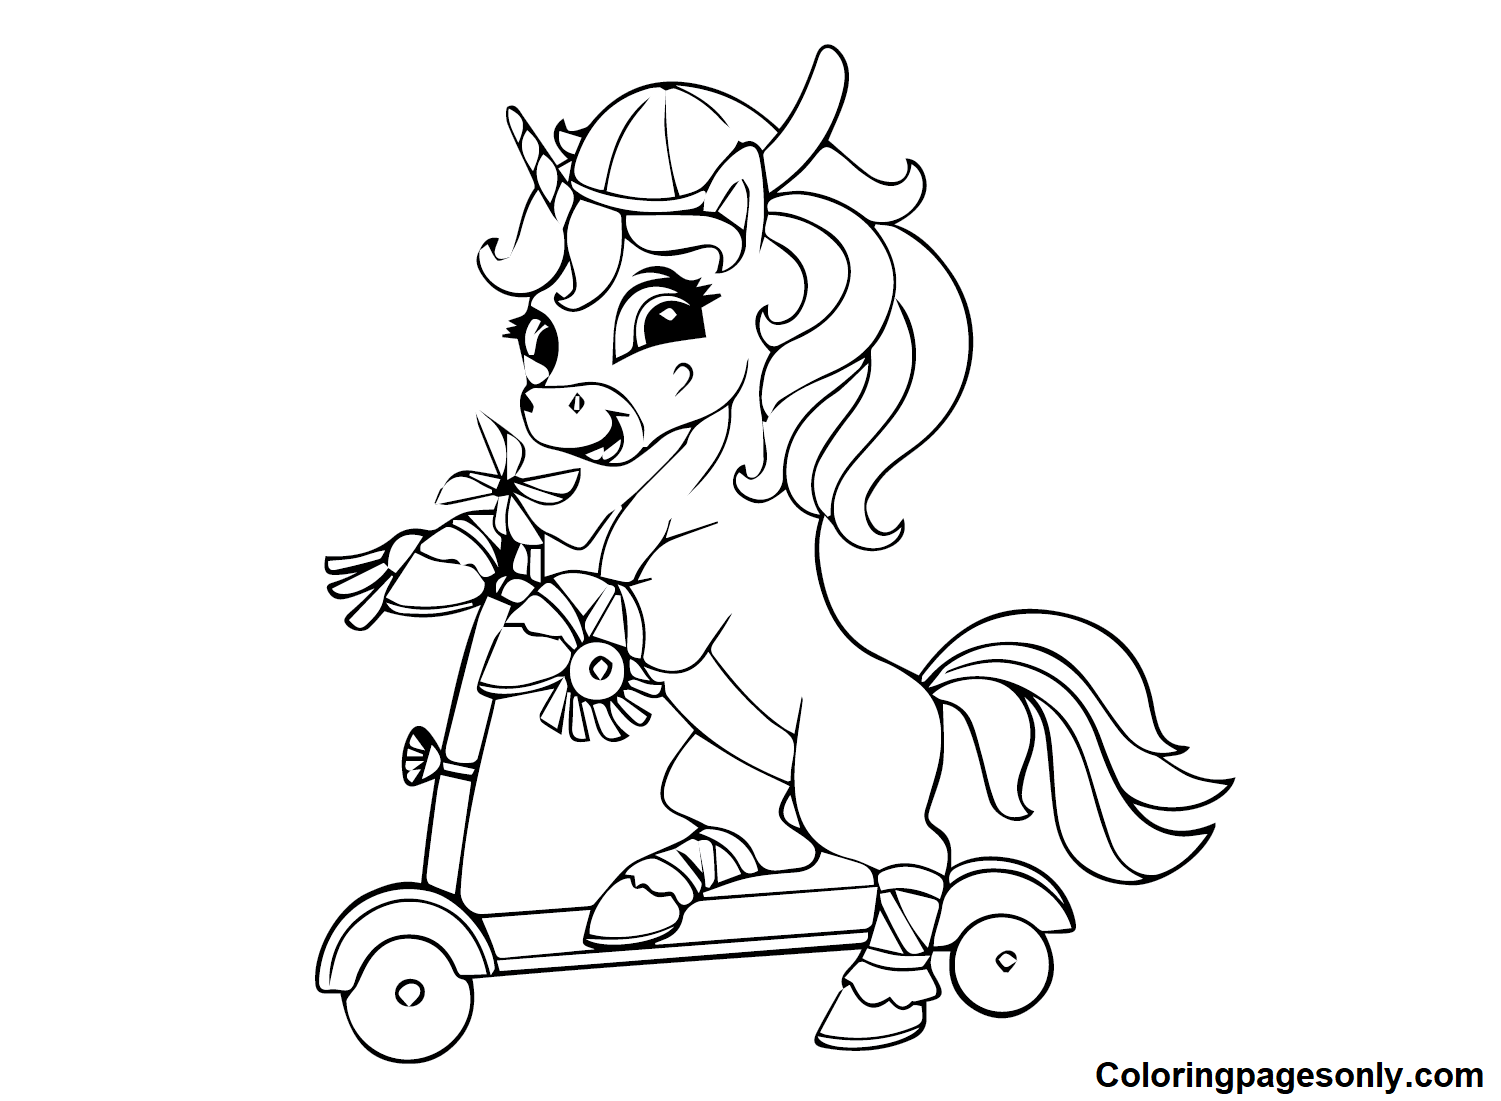 Floof Rainbow Rangers Coloring Pages